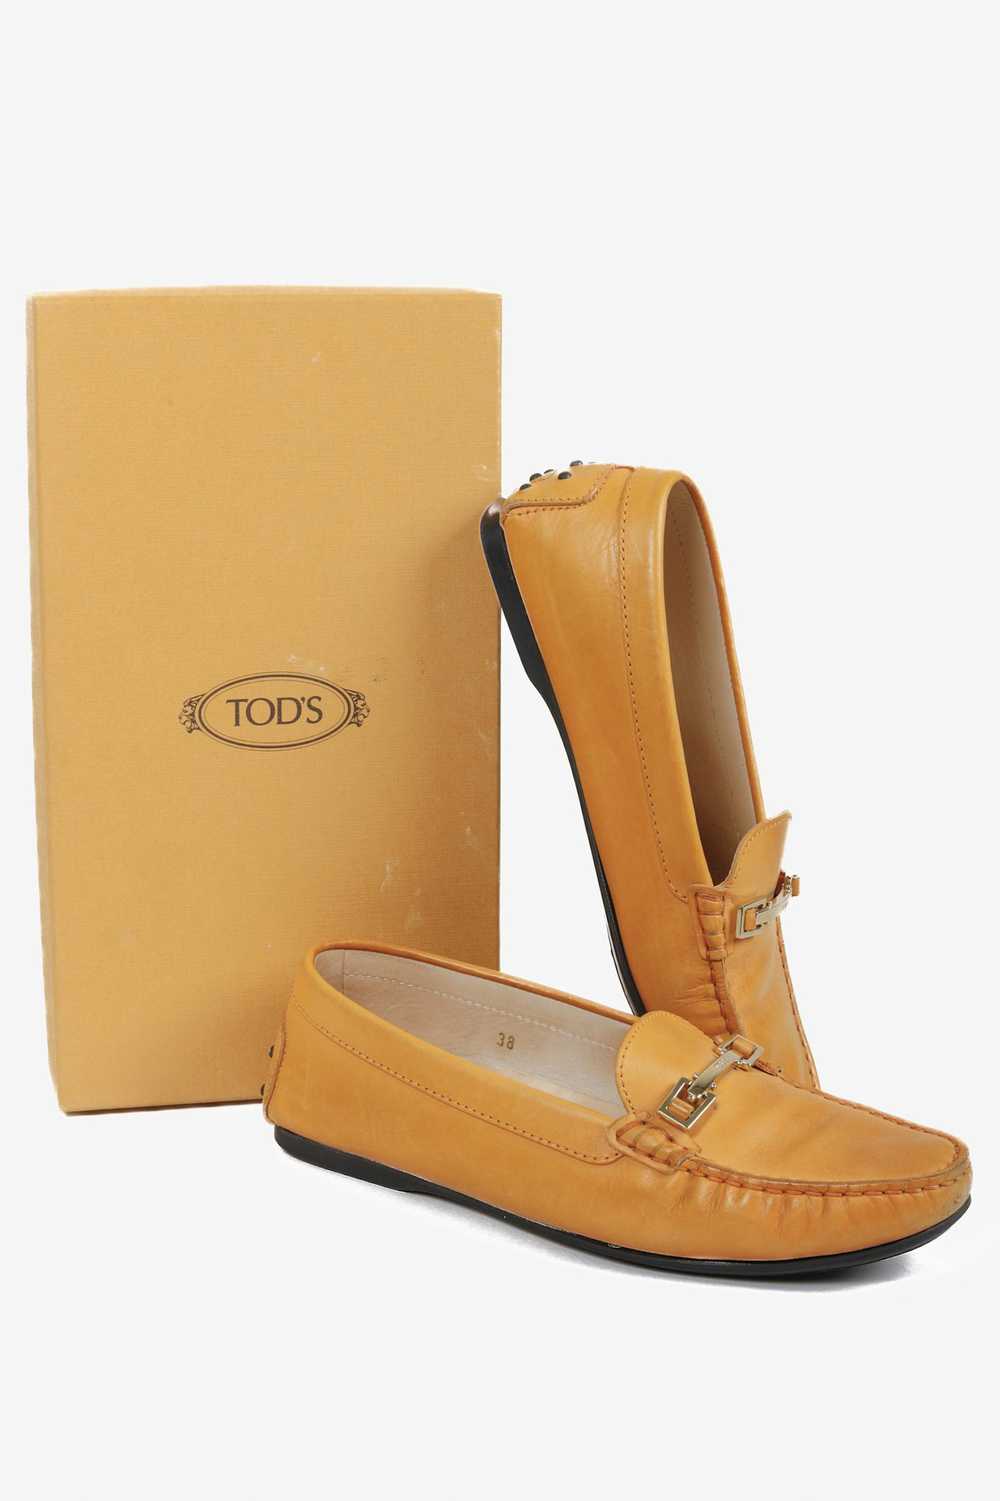 Tod's Tod's Orange Leather Driving Loafers - image 10